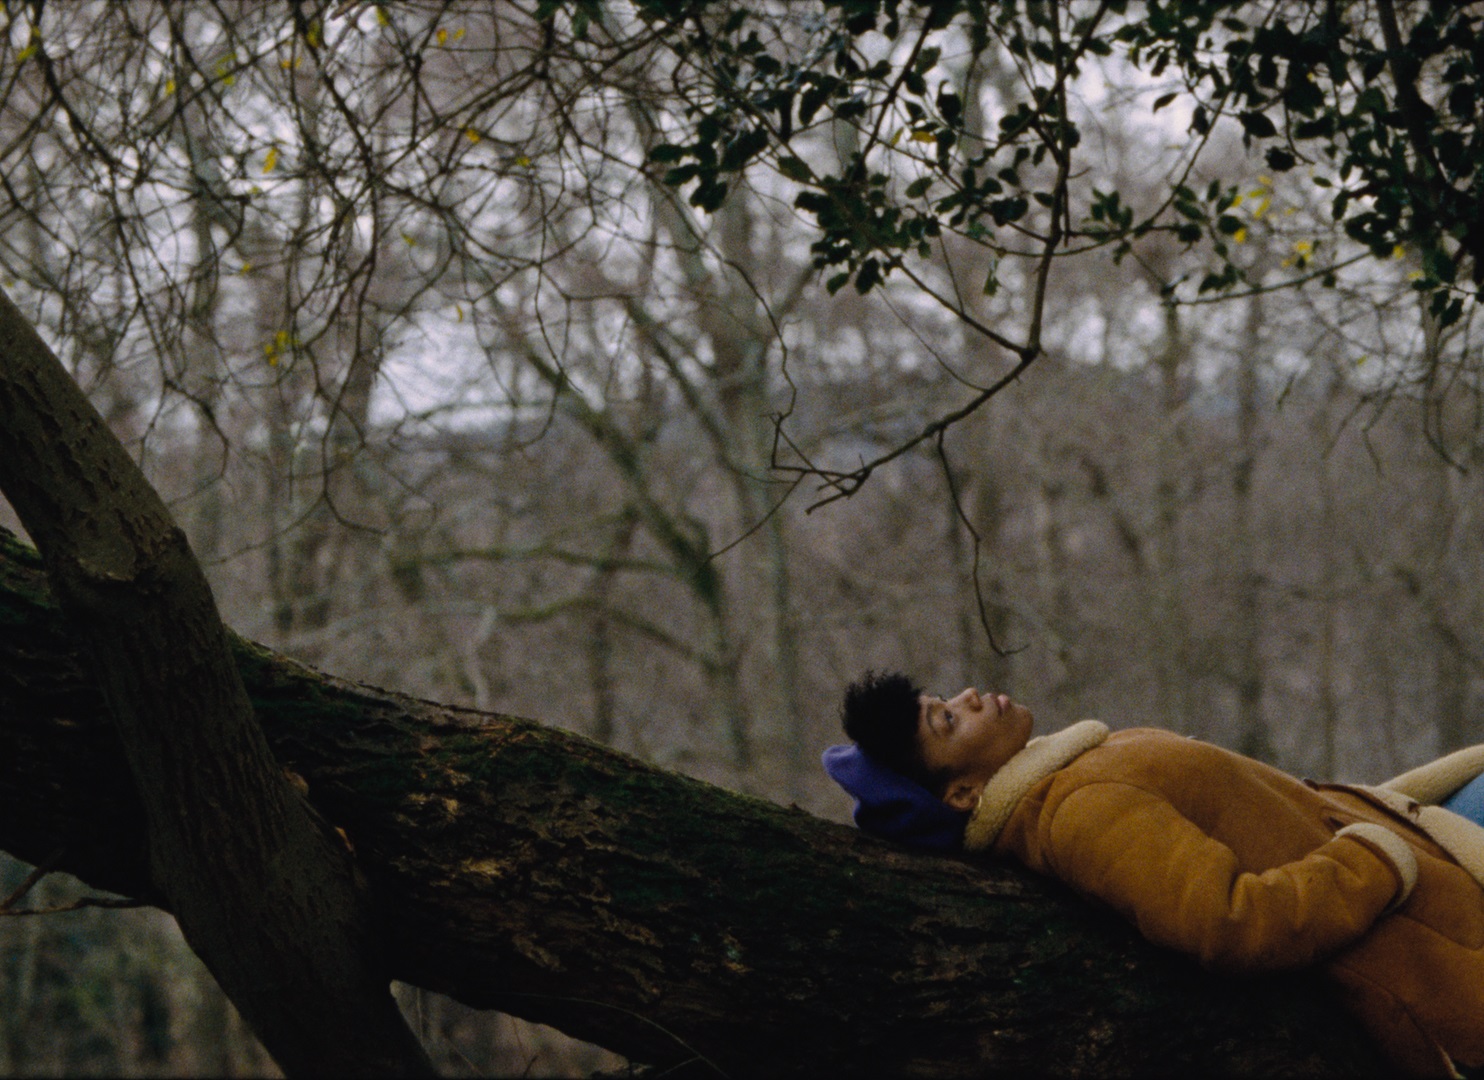 Master of None Season 3: Naomi Ackie lying on a tree branch